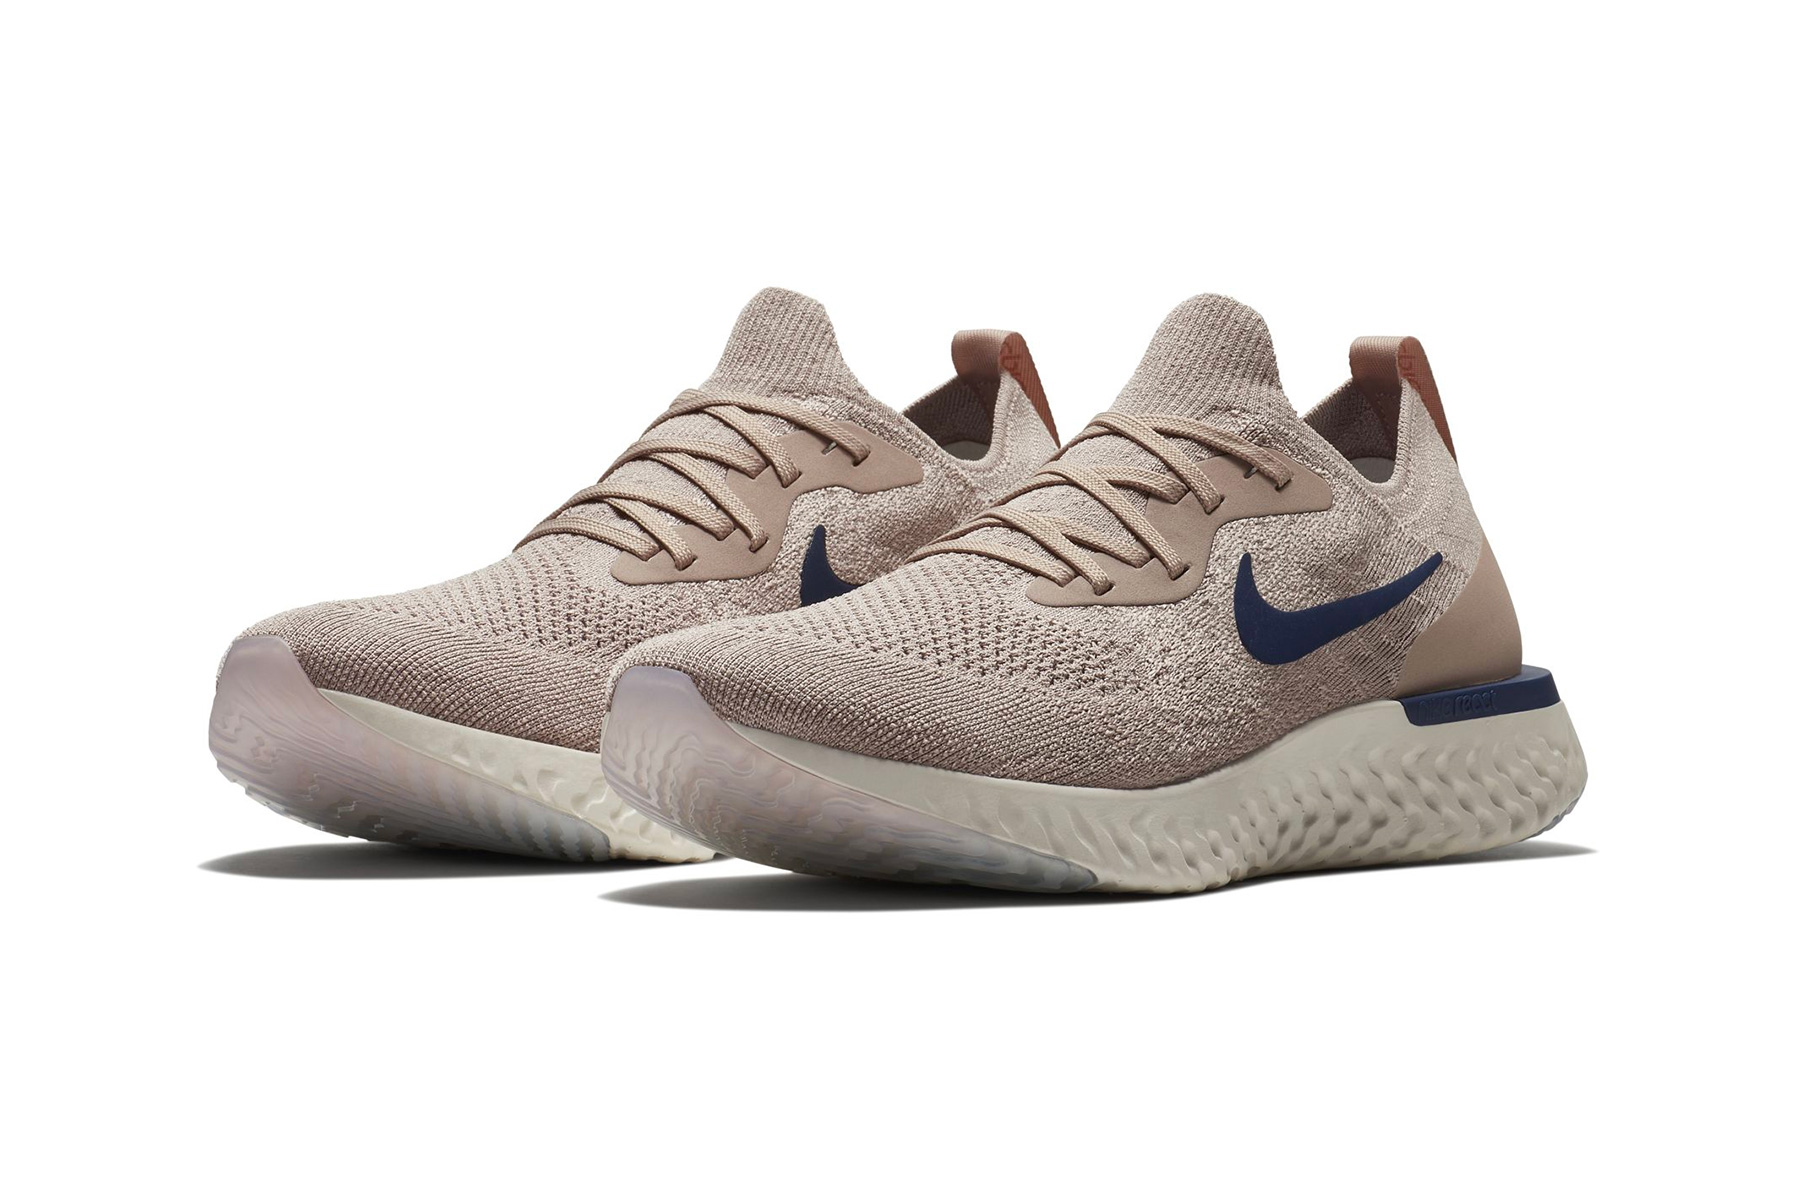 how to clean epic react flyknit